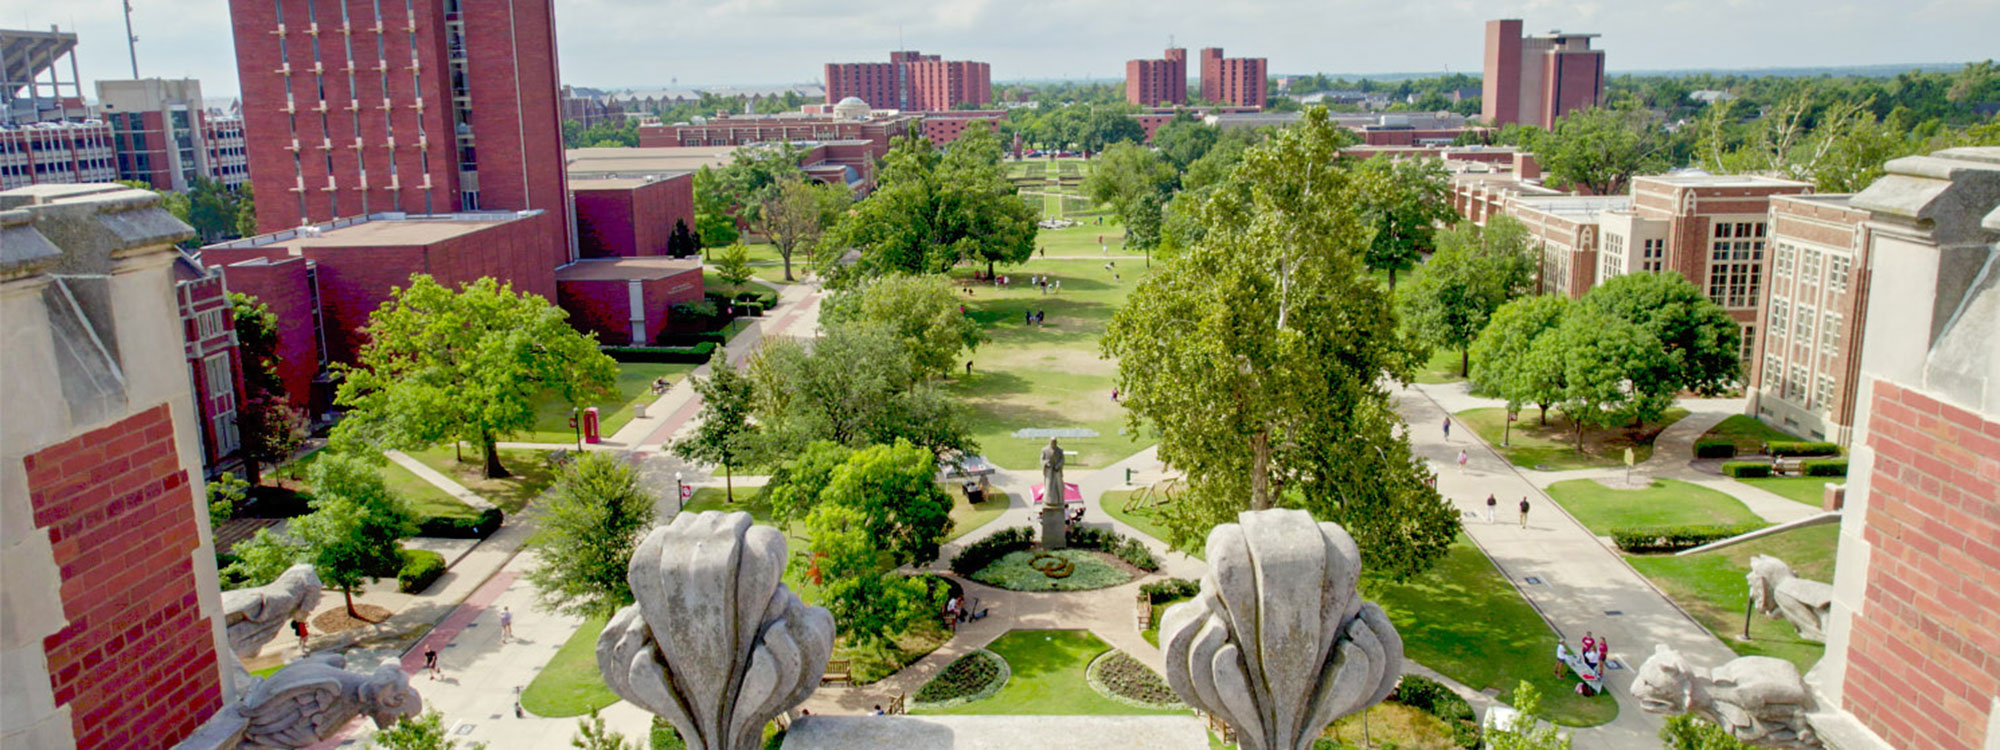 Ariel view of Norman campus